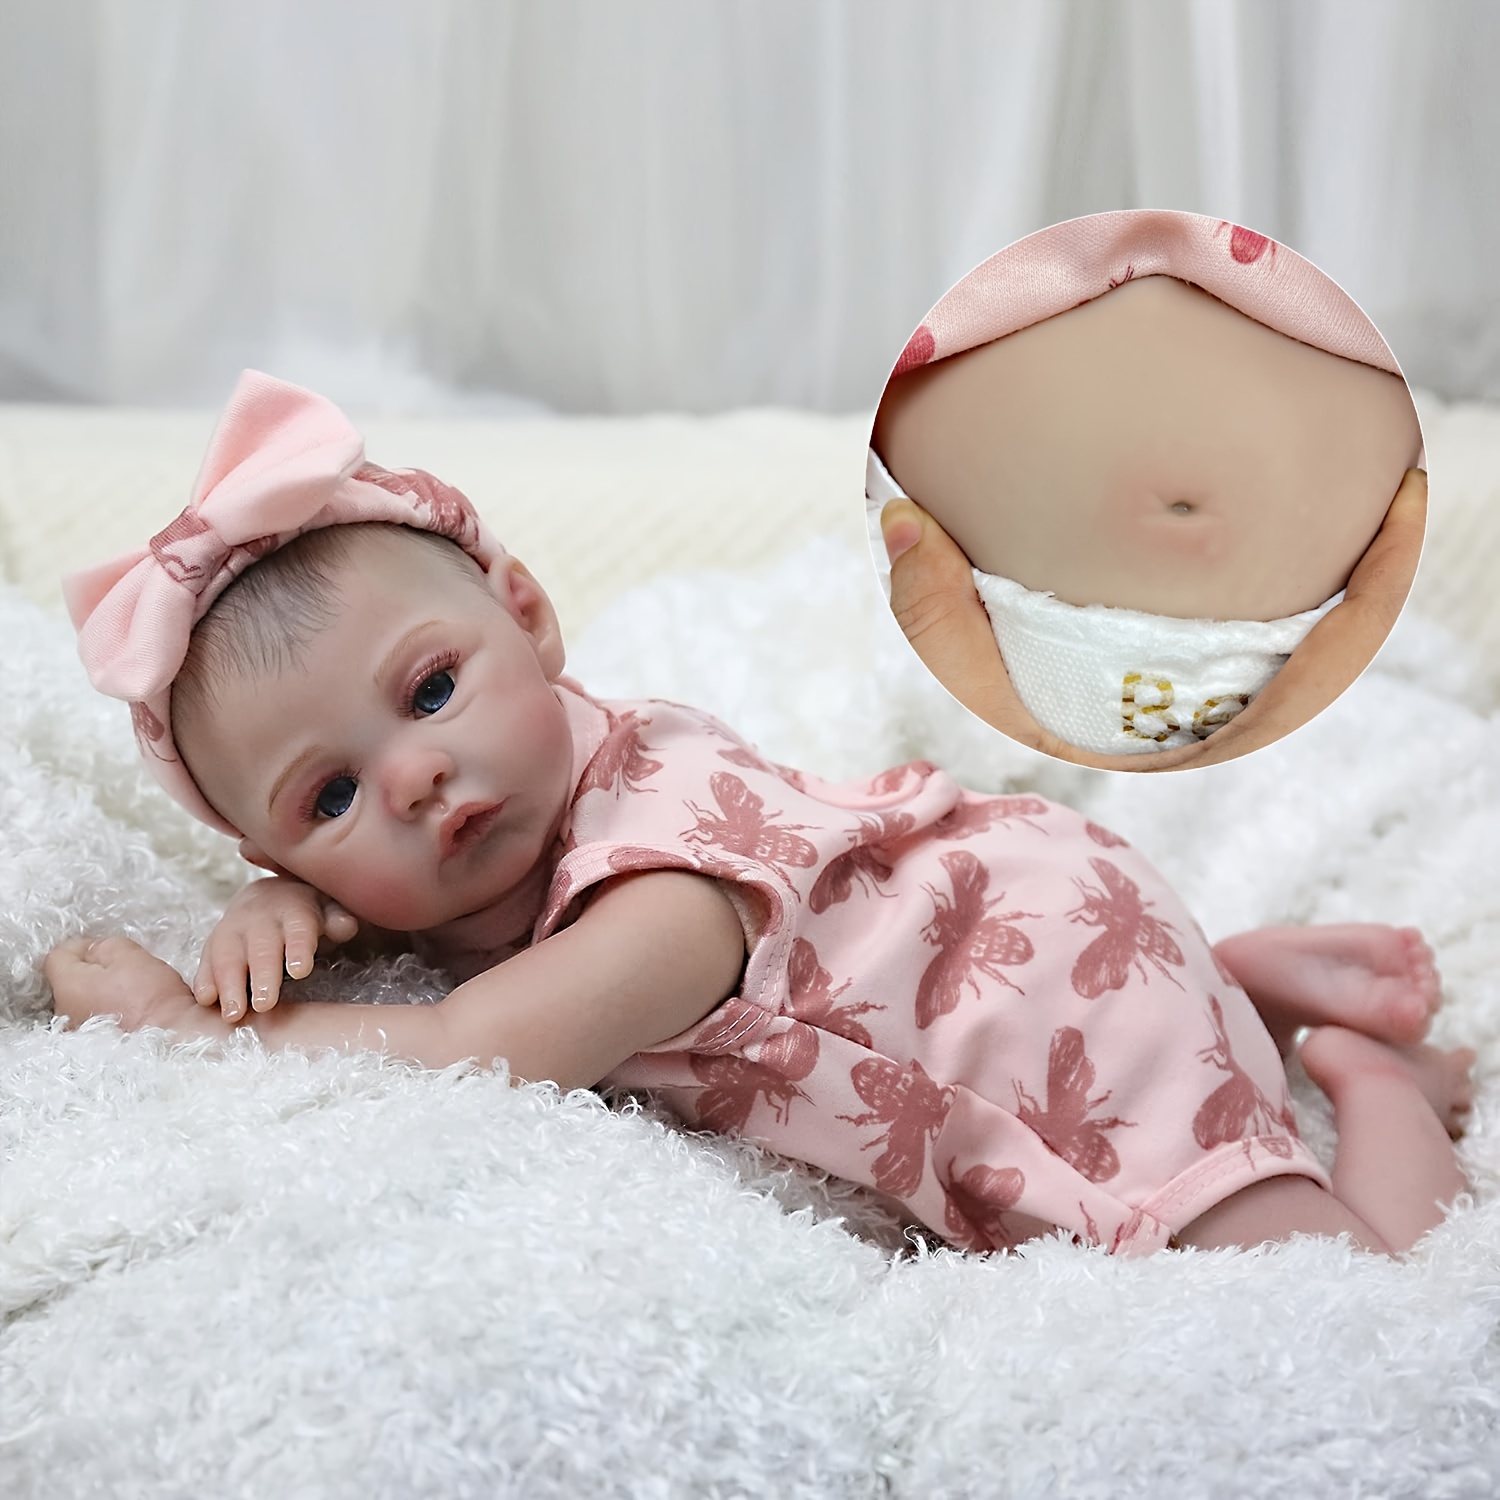 RXDOLL Realistic Baby Reborn Dolls Silicone Full Body Girl 22 inches Reborn  Toddler Washable Baby Dolls That Look Real Lifelike Baby Dolls with Pink